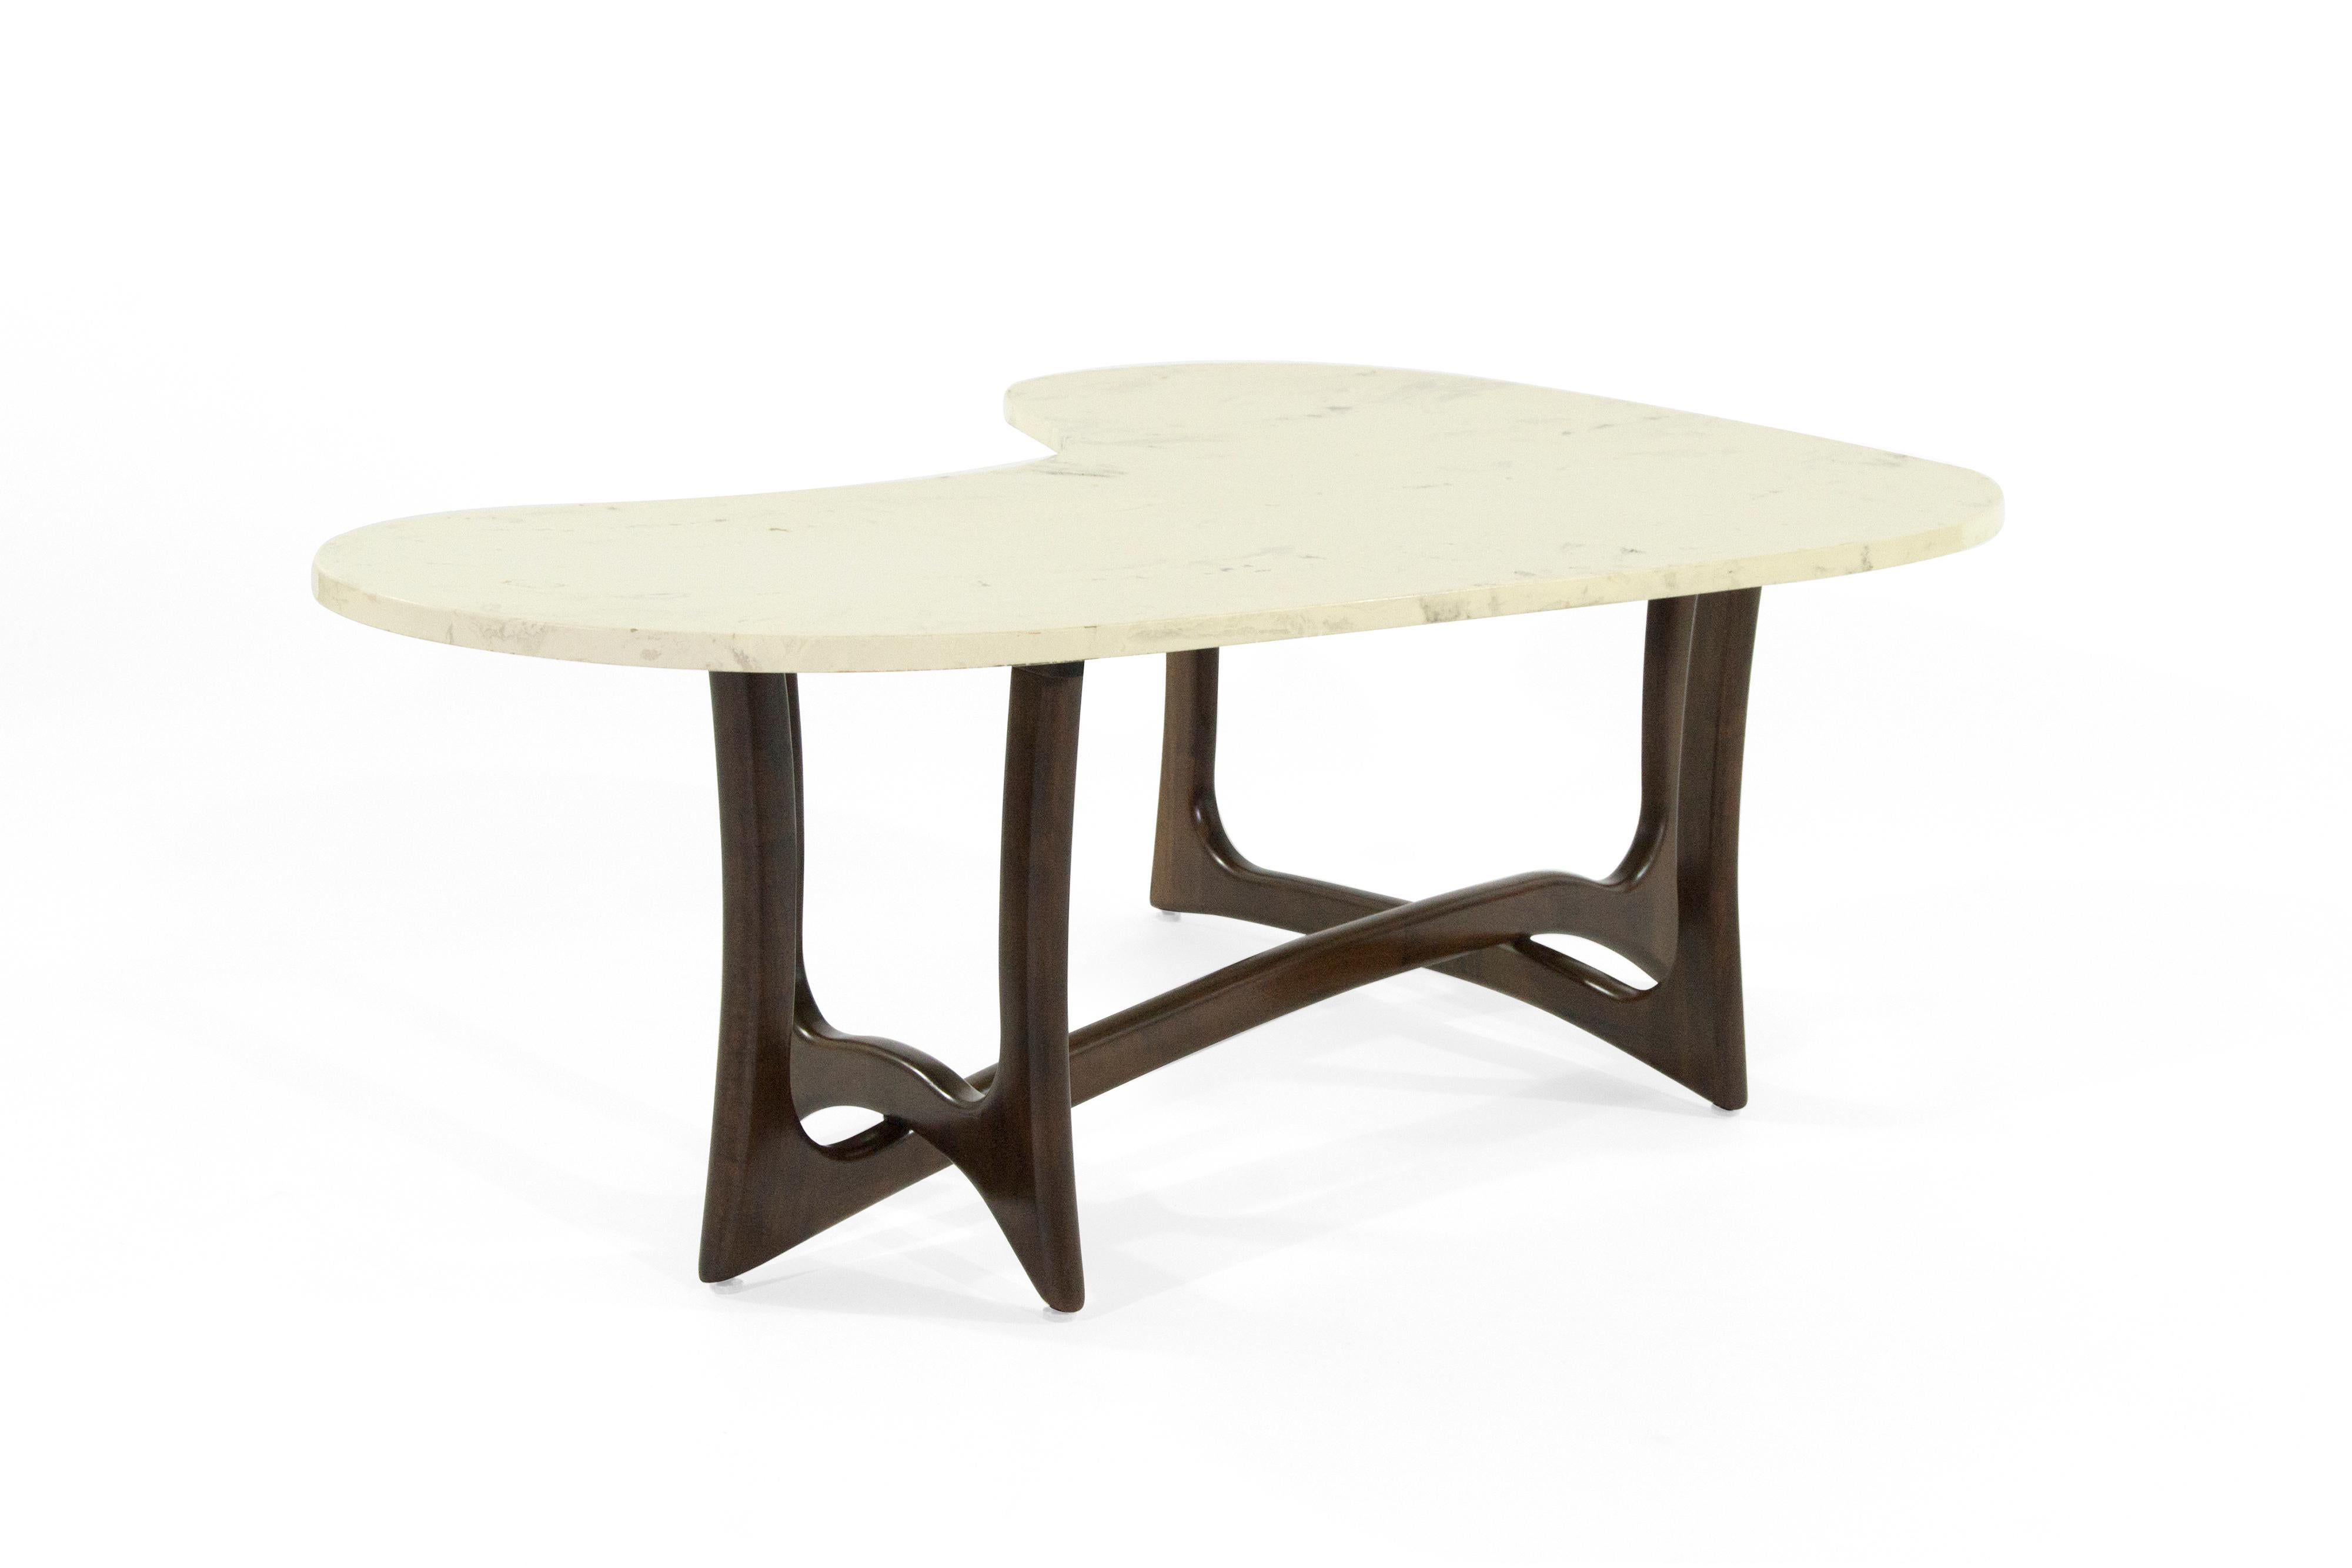 An extremely rare coffee table designed by Adrian Pearsall, circa 1950s. Features a newly polished biomorphic shaped off-white marble top and a fully restored sculptural walnut base.